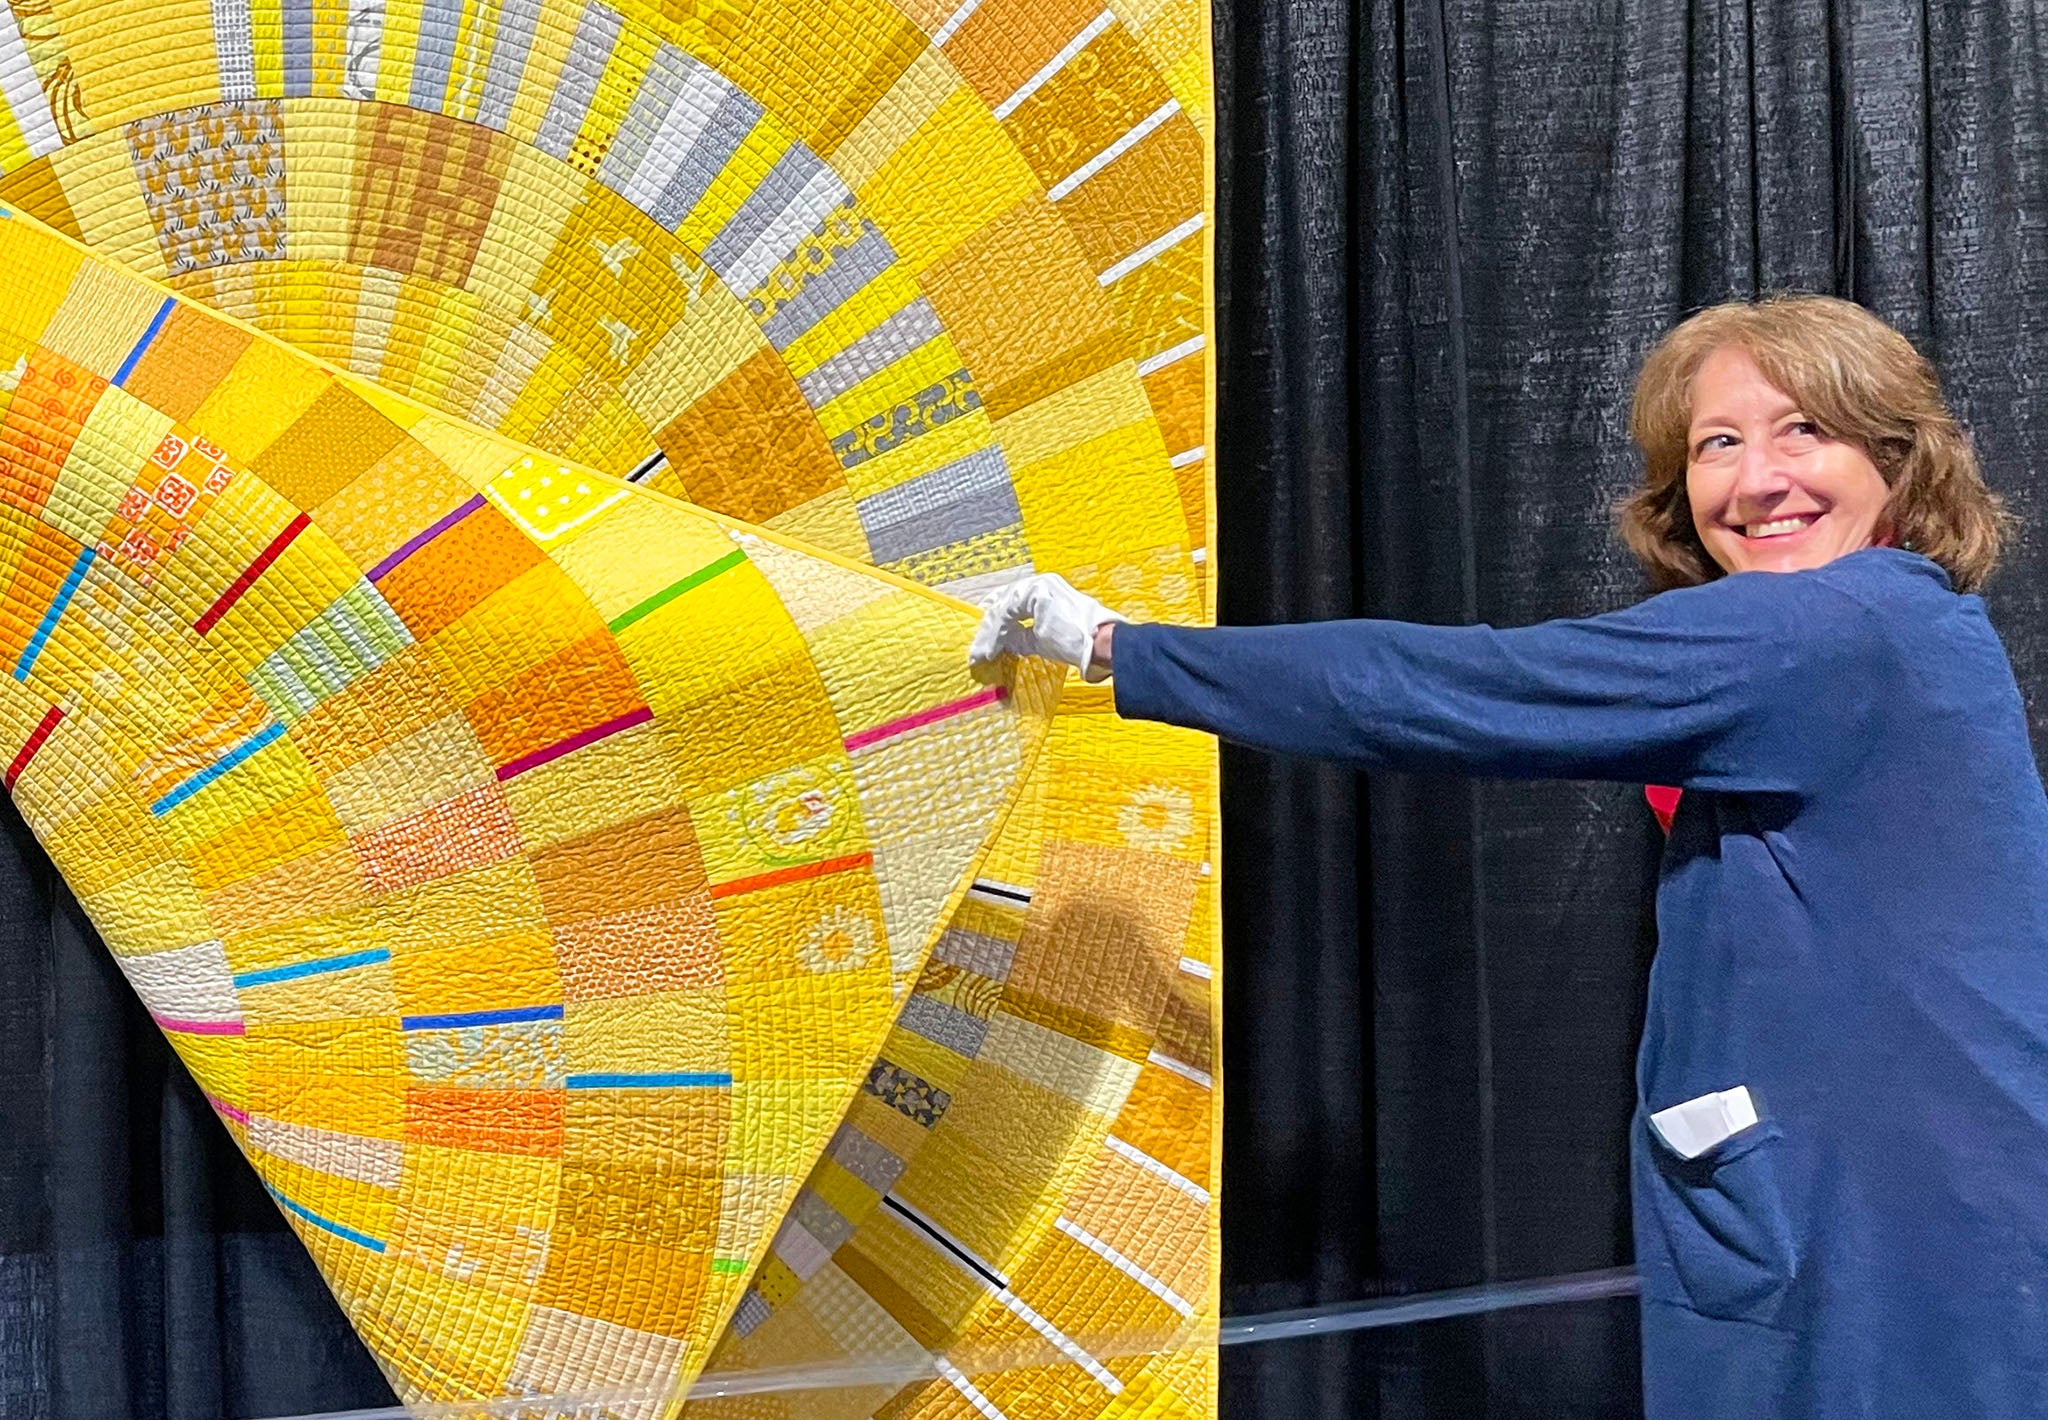 Long Beach Quilt Festival 2023 - White Glove Attendant Leia showing the back of Turn the Dial by Kathy York - Photo By Victoria Stone